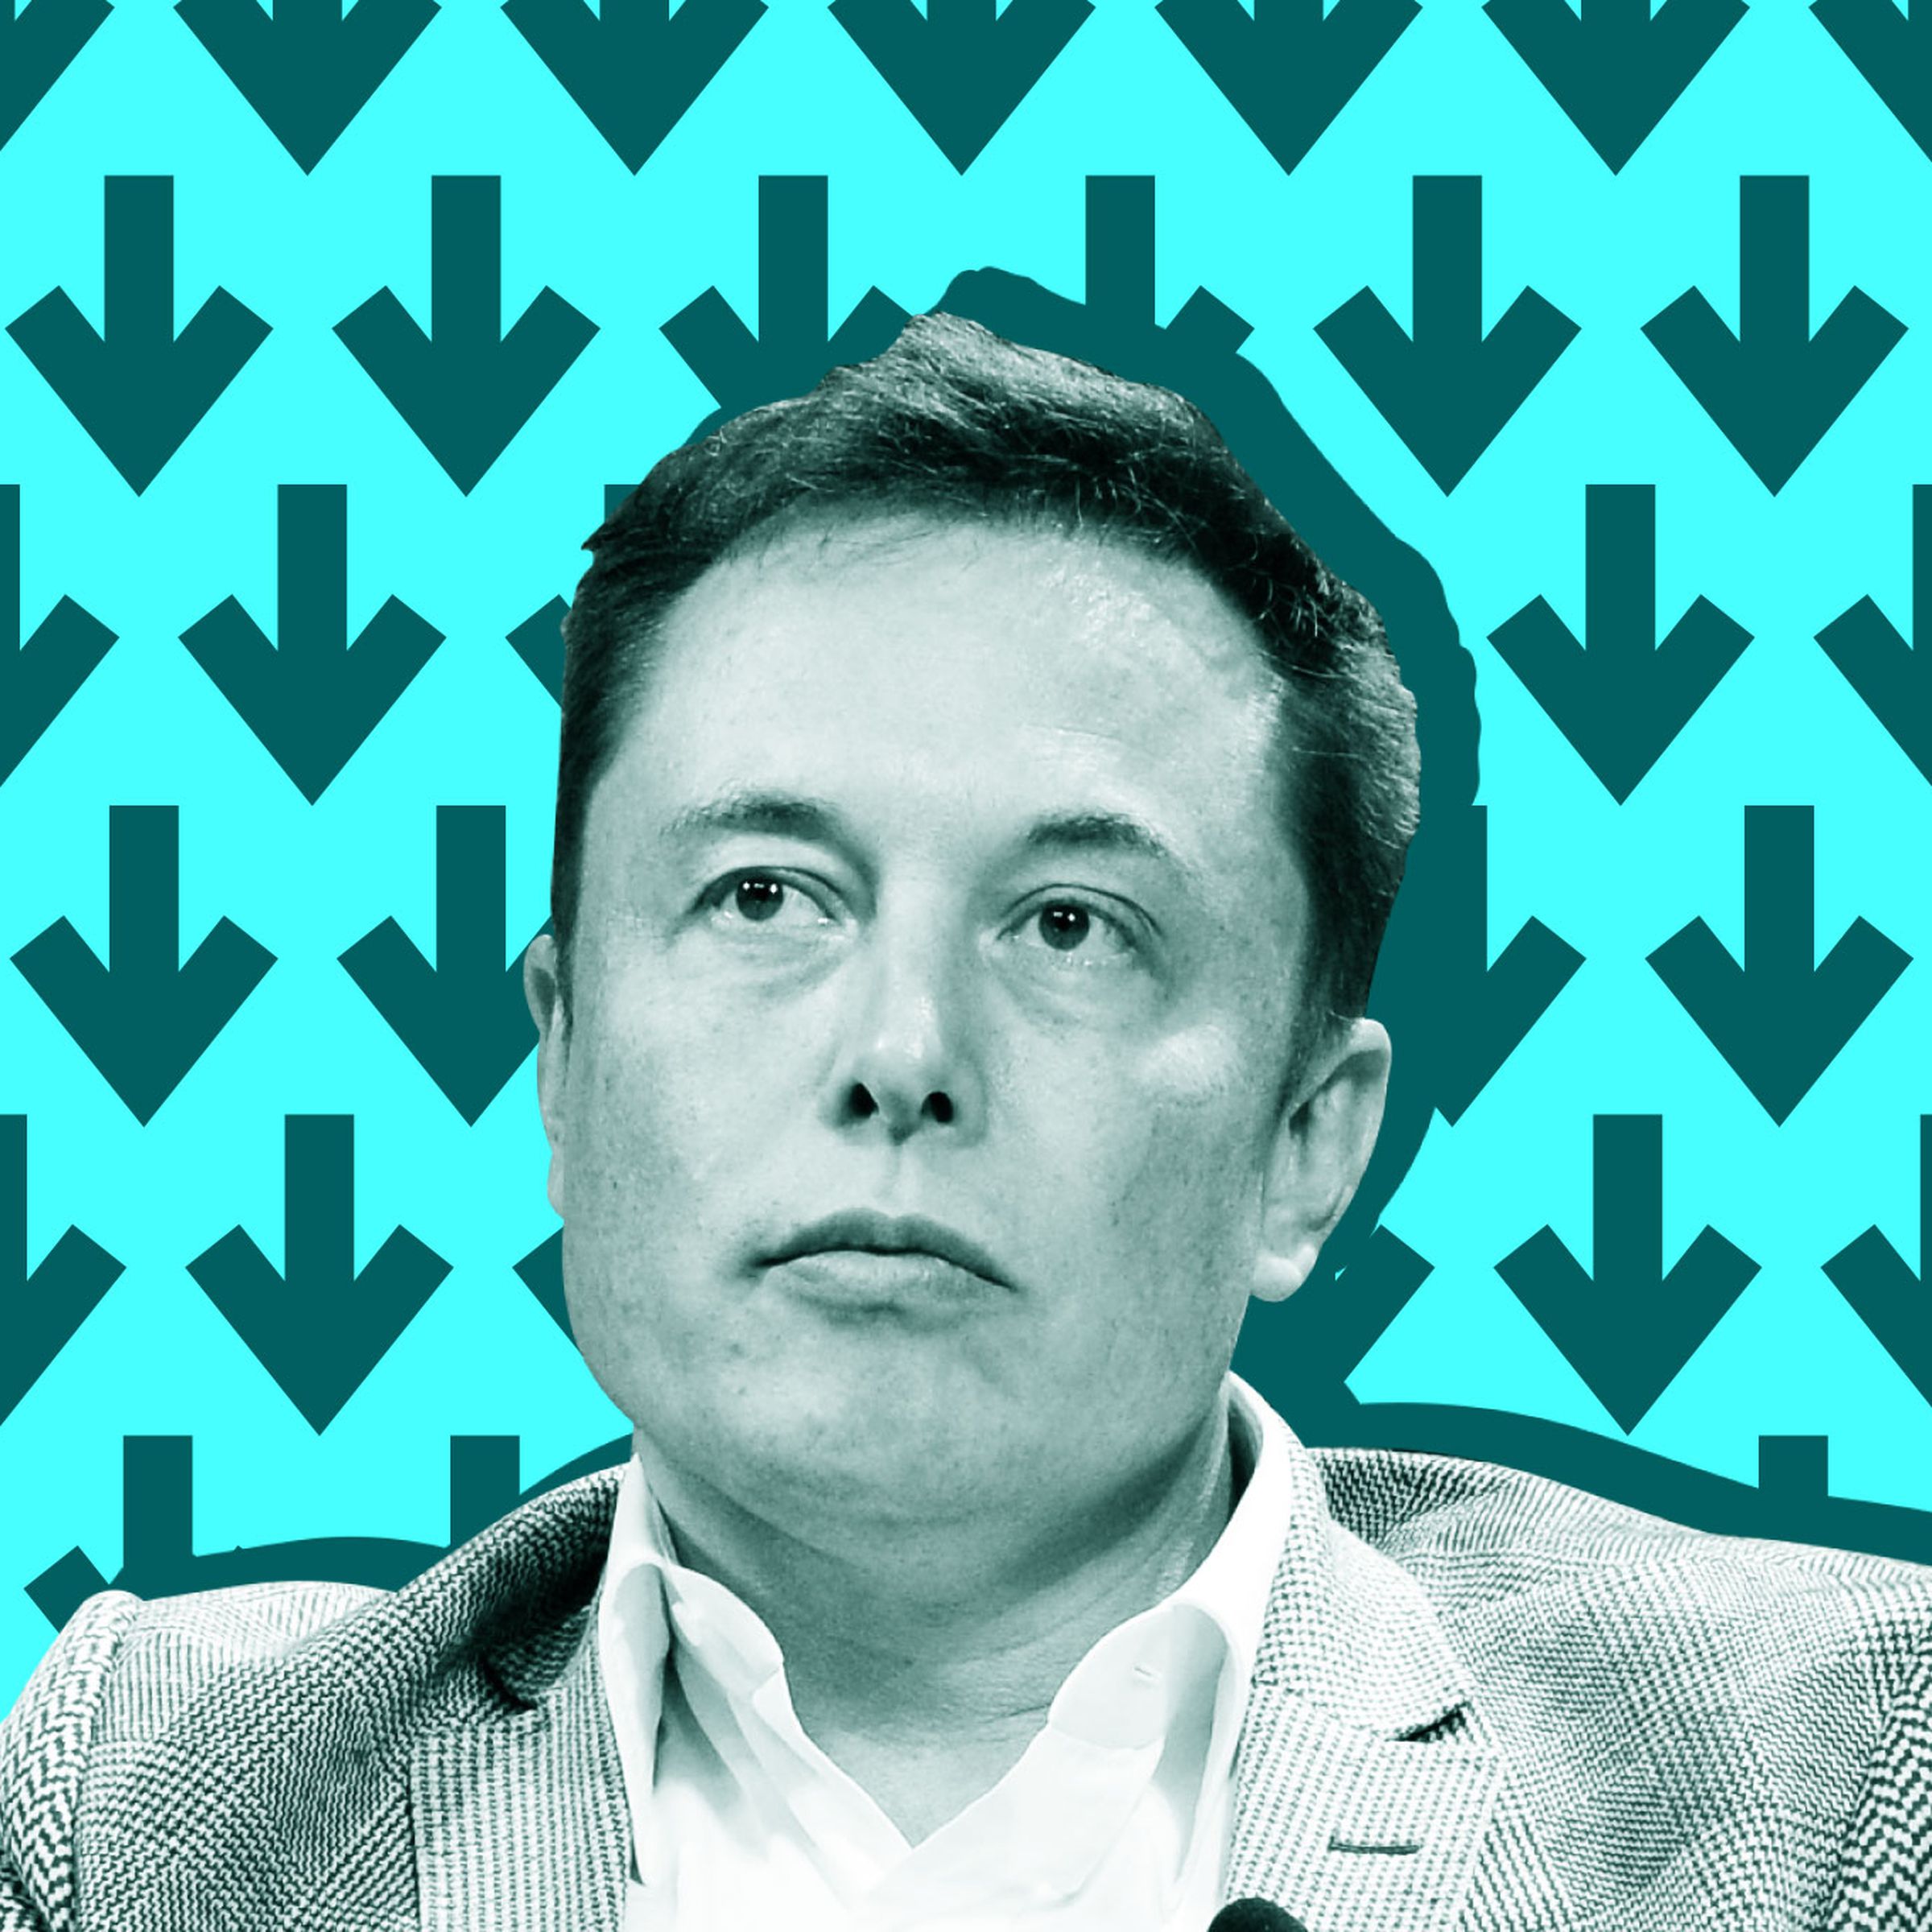 Elon Musk on a blue backdrop surrounded by downward pointing arrows